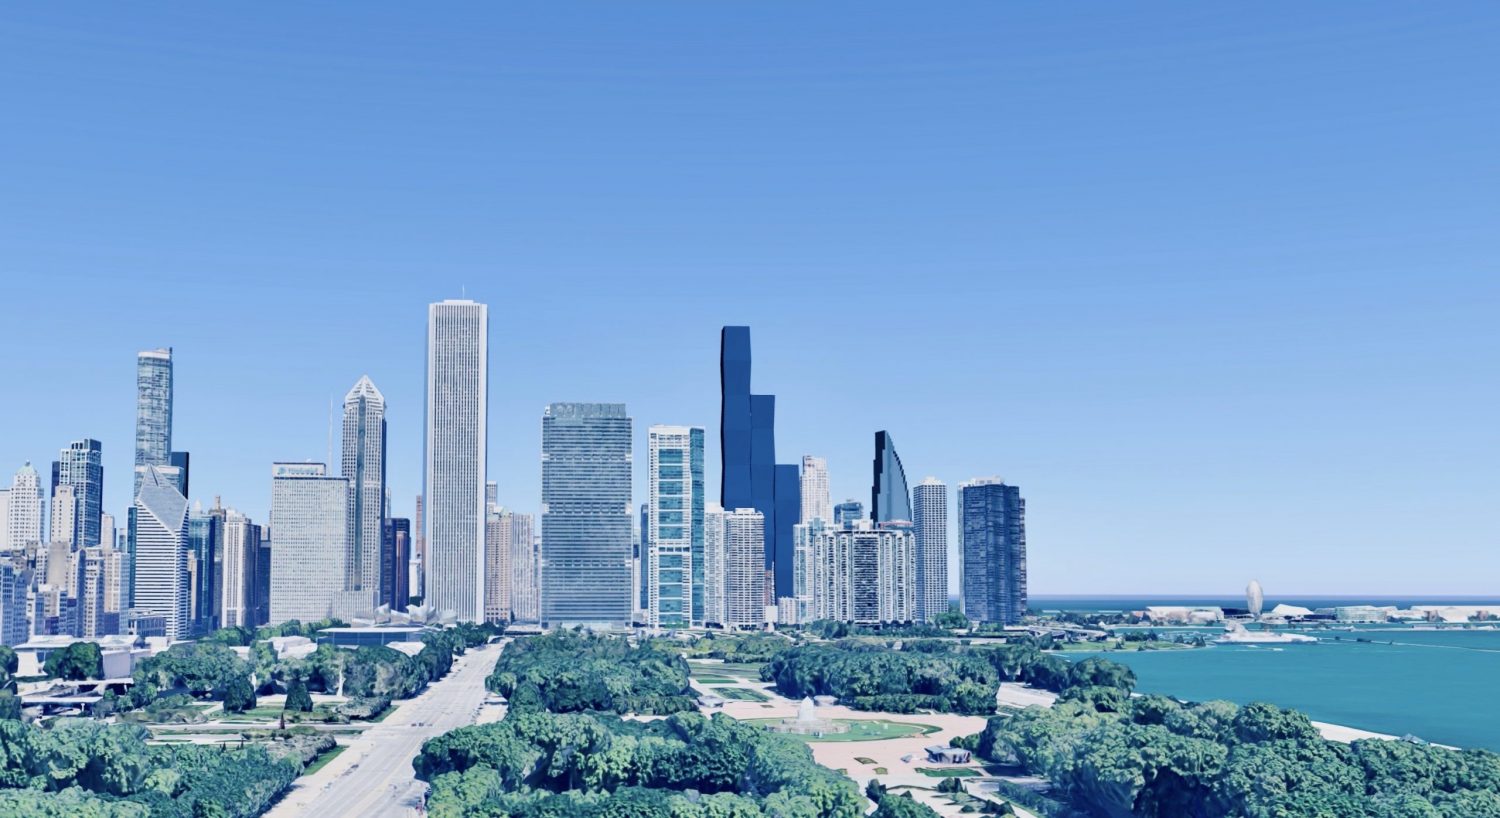 Renderings of Vista Tower (dark blue, center) and the nearby towers recently approved for 400 N Lake Shore Drive (light-gray, right)